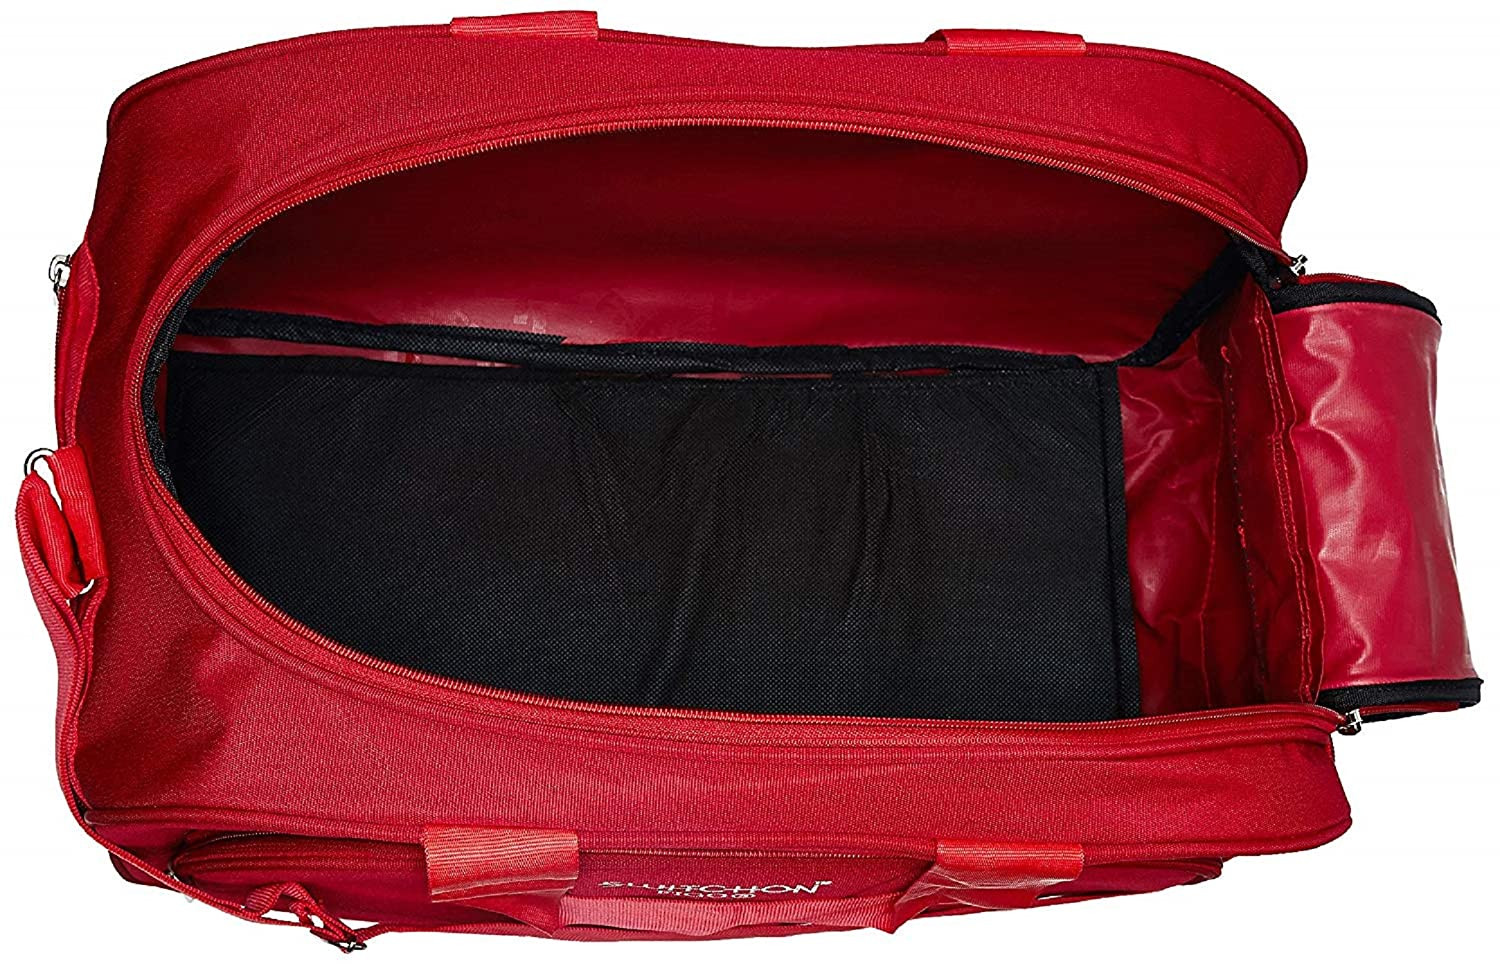 Kuber Industries Foldable Rexine Travel Storage Luggage Bag Carrying Bag (Red)